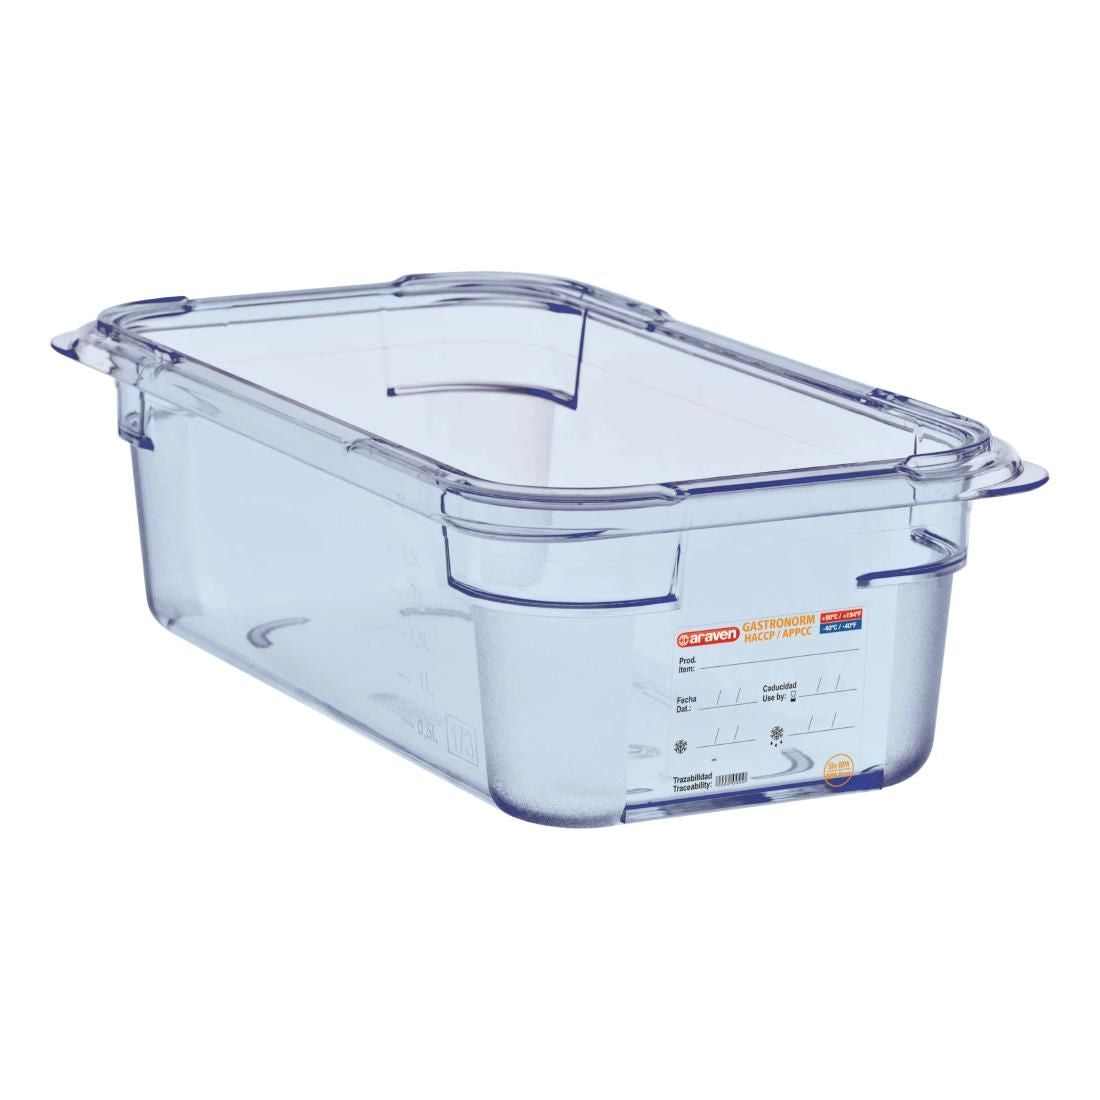 GP579 Araven ABS Food Storage Container Blue GN 1/3 100mm JD Catering Equipment Solutions Ltd